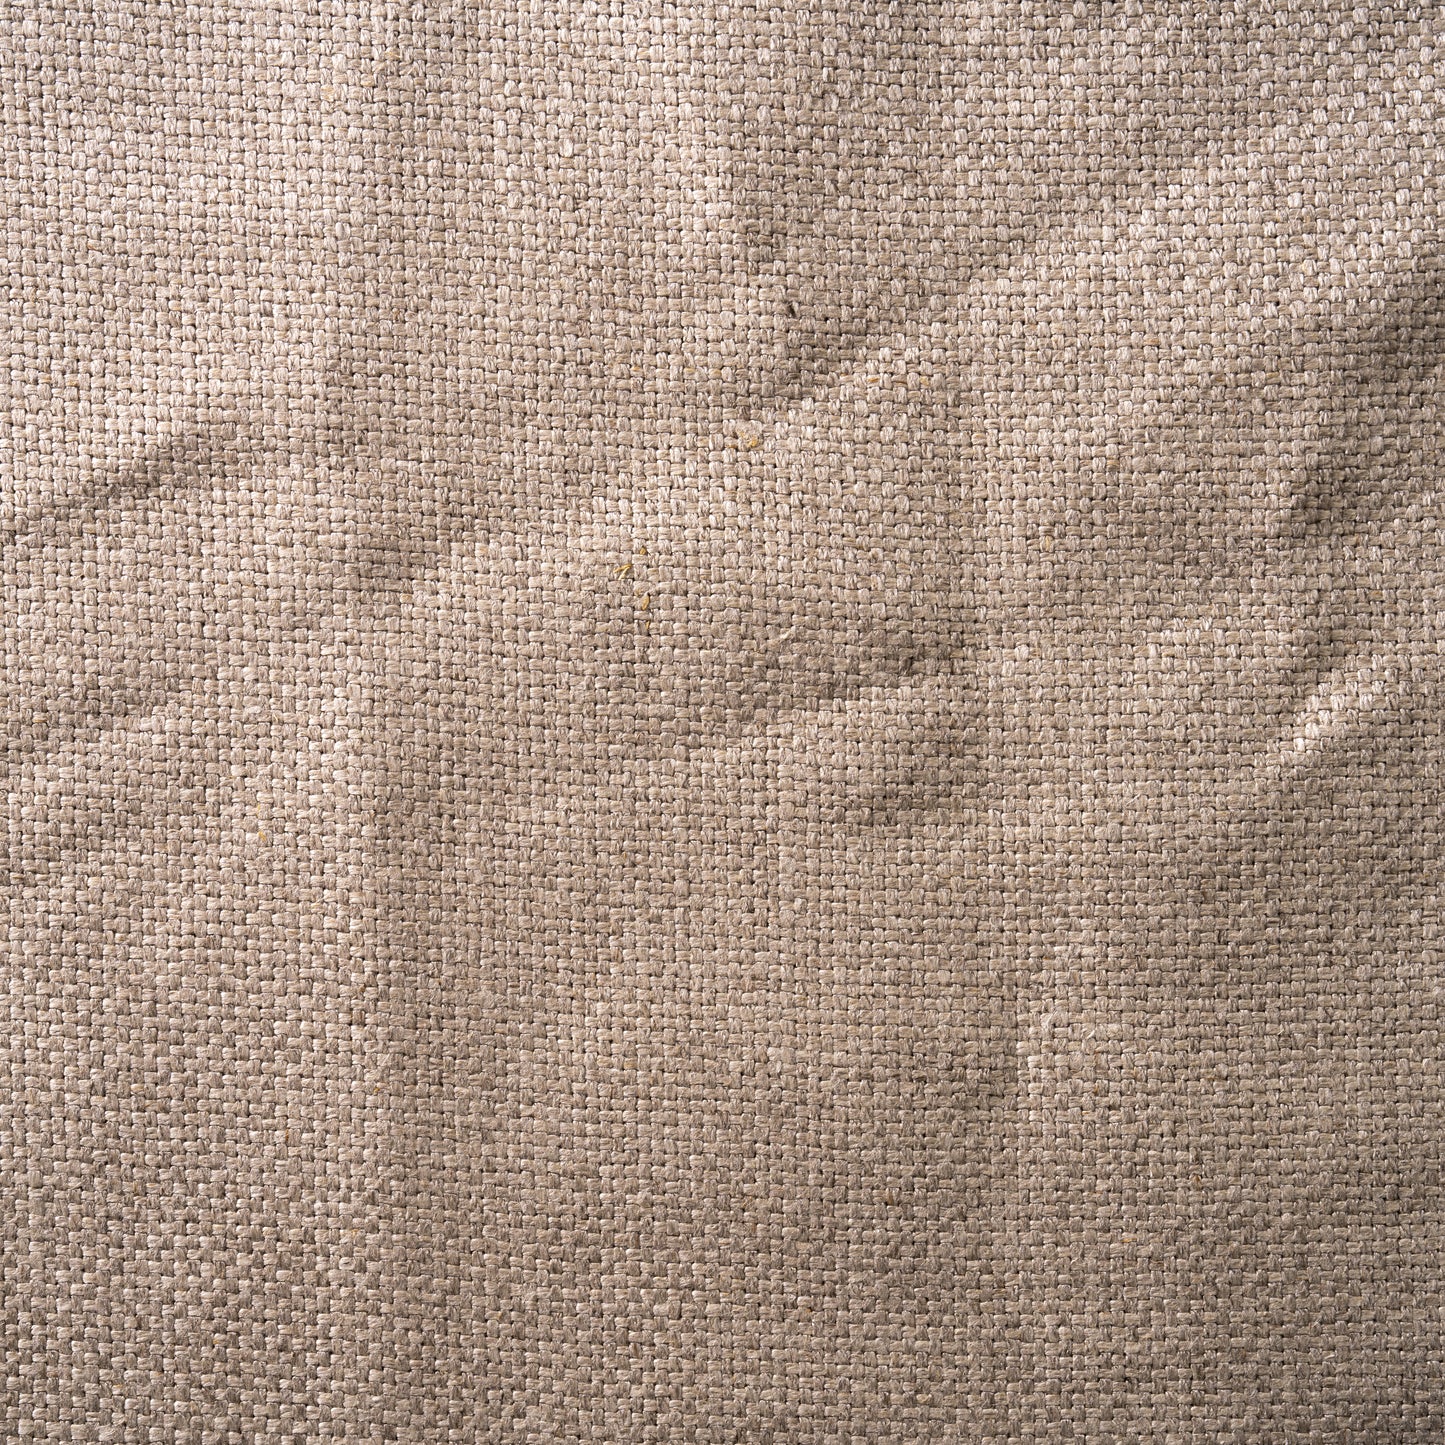 14.5 oz/sq yard 100% Upholstery Weight Linen in Natural